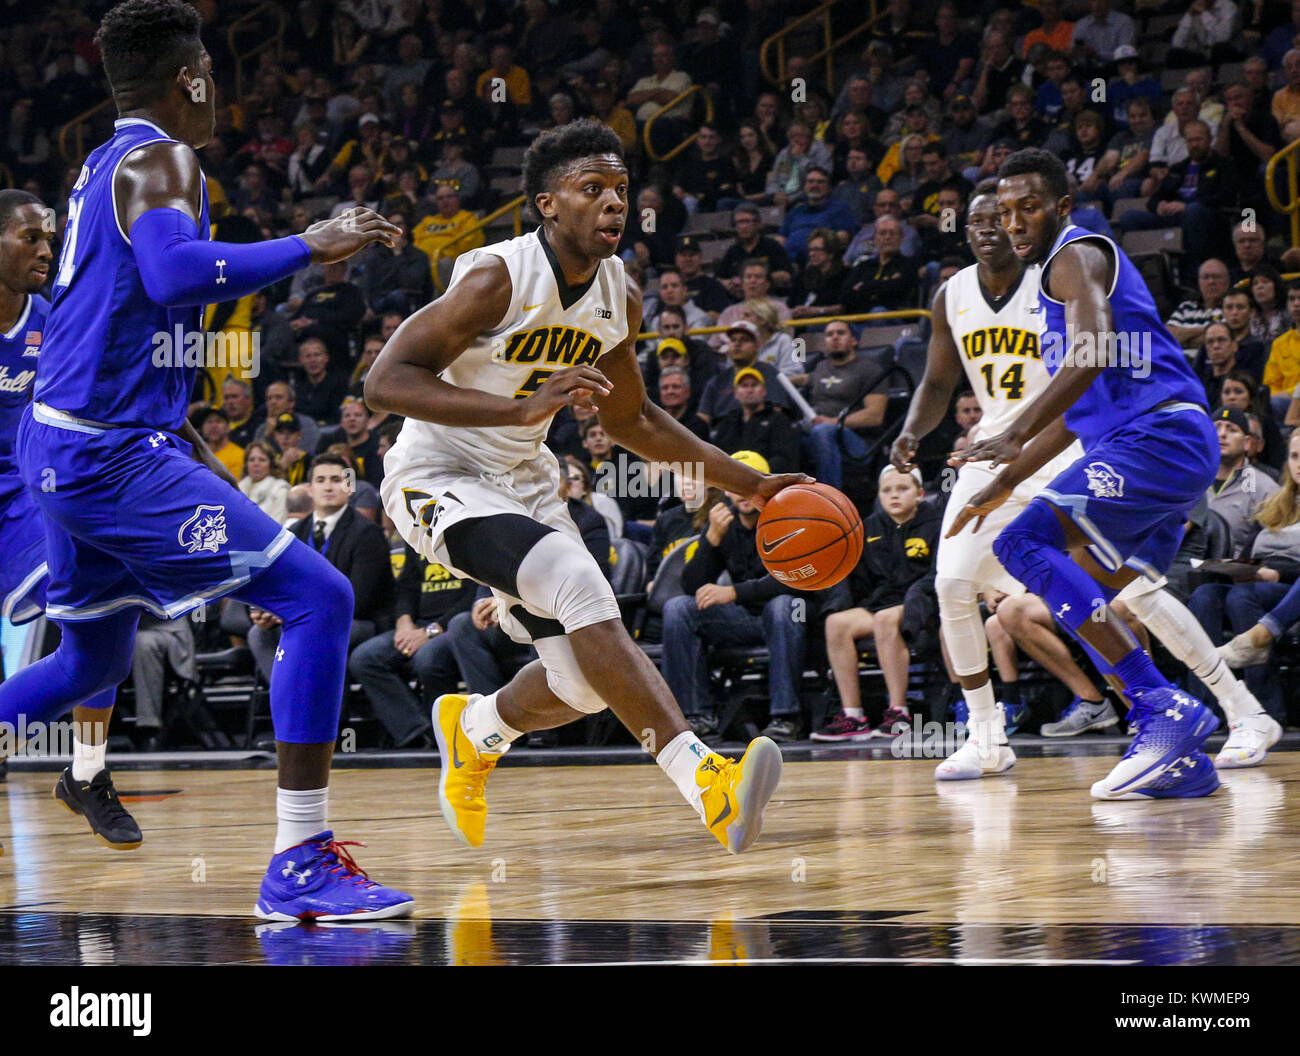 Iowa City, Iowa, USA. 17th Nov, 2016. Iowa forward Tyler Cook (5) moves down the court during the first half of their game at Carver-Hawkeye Arena in Iowa Cityon Thursday, November 17, 2016. Credit: Andy Abeyta/Quad-City Times/ZUMA Wire/Alamy Live News Stock Photo